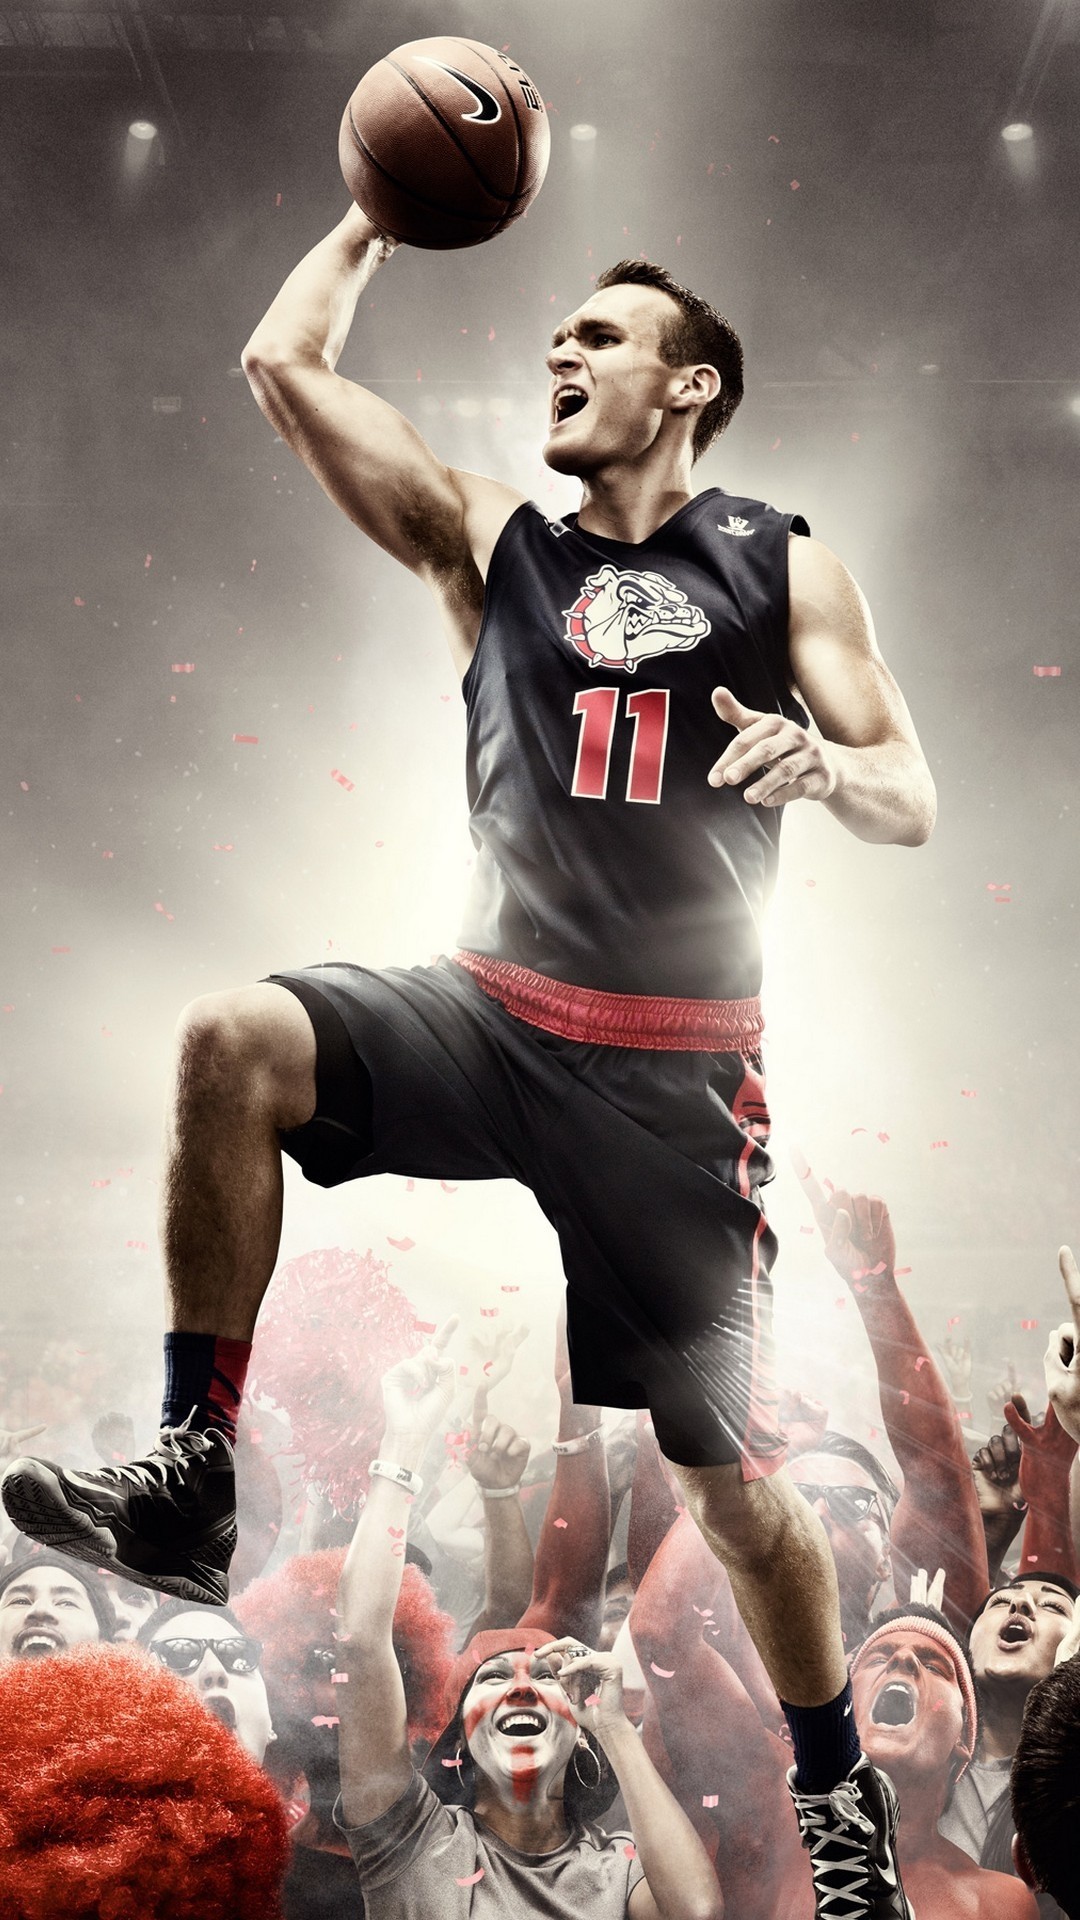 Basketball wallpaper for android